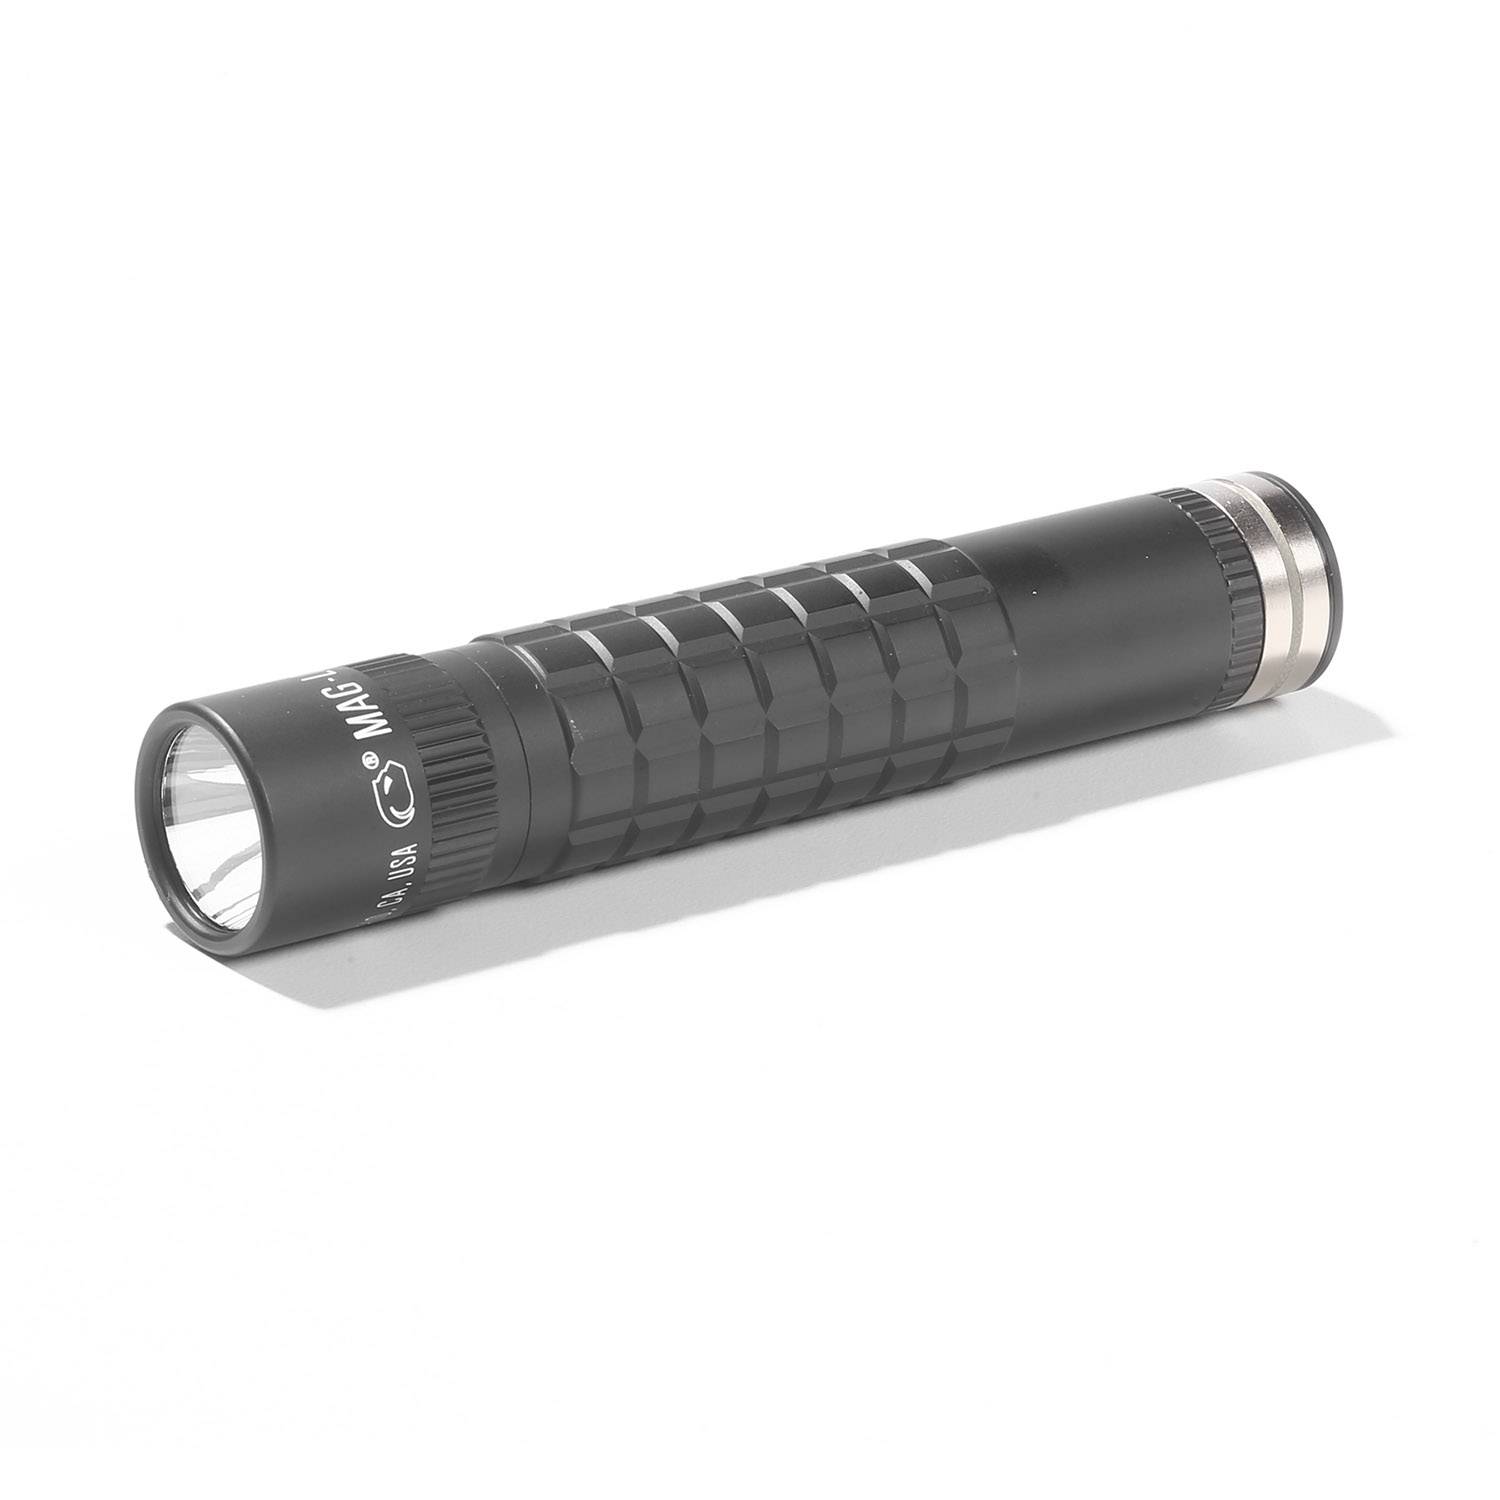 MagLite MagTac LED Rechargeable Flashlight with Plain Bezel